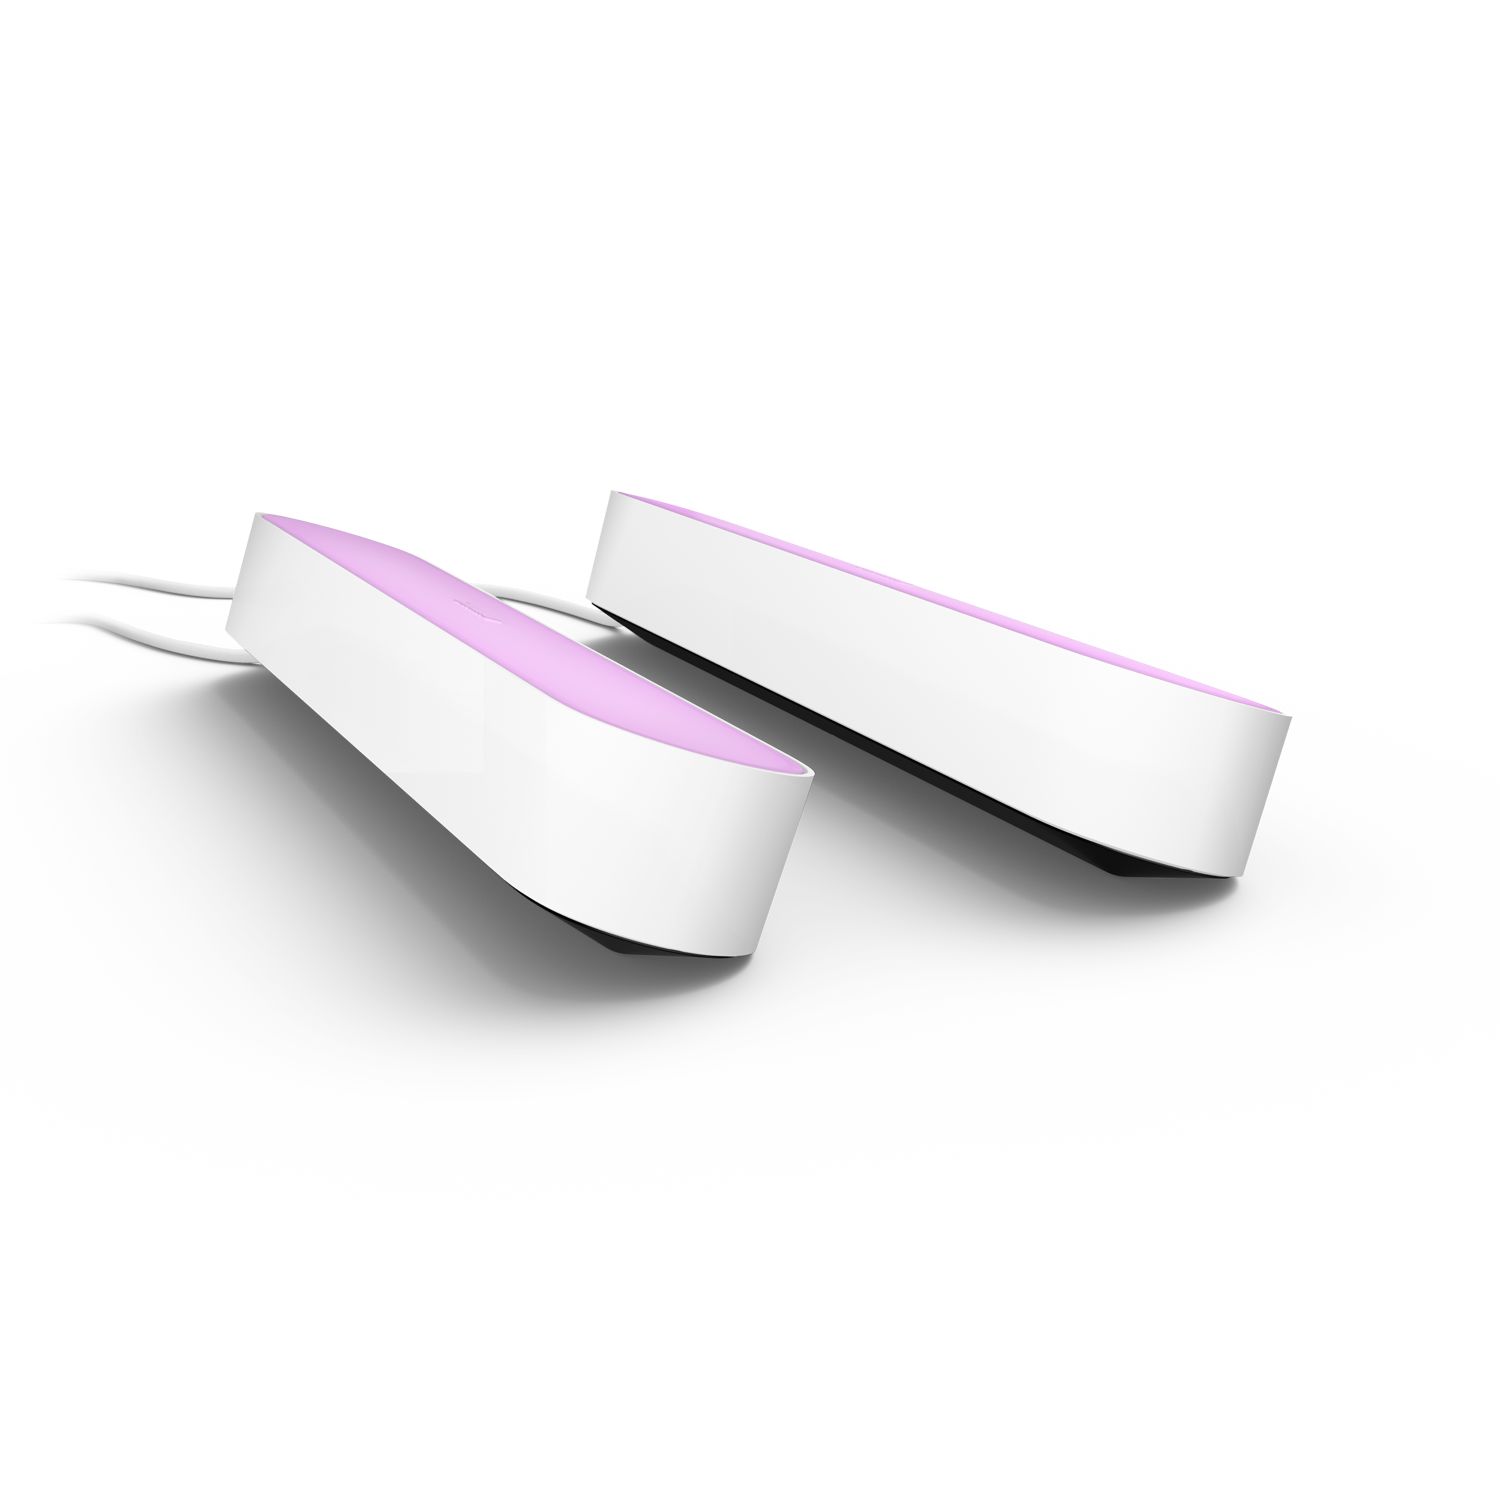 Hue White and color ambiance Play light bar double pack Philips Hue US